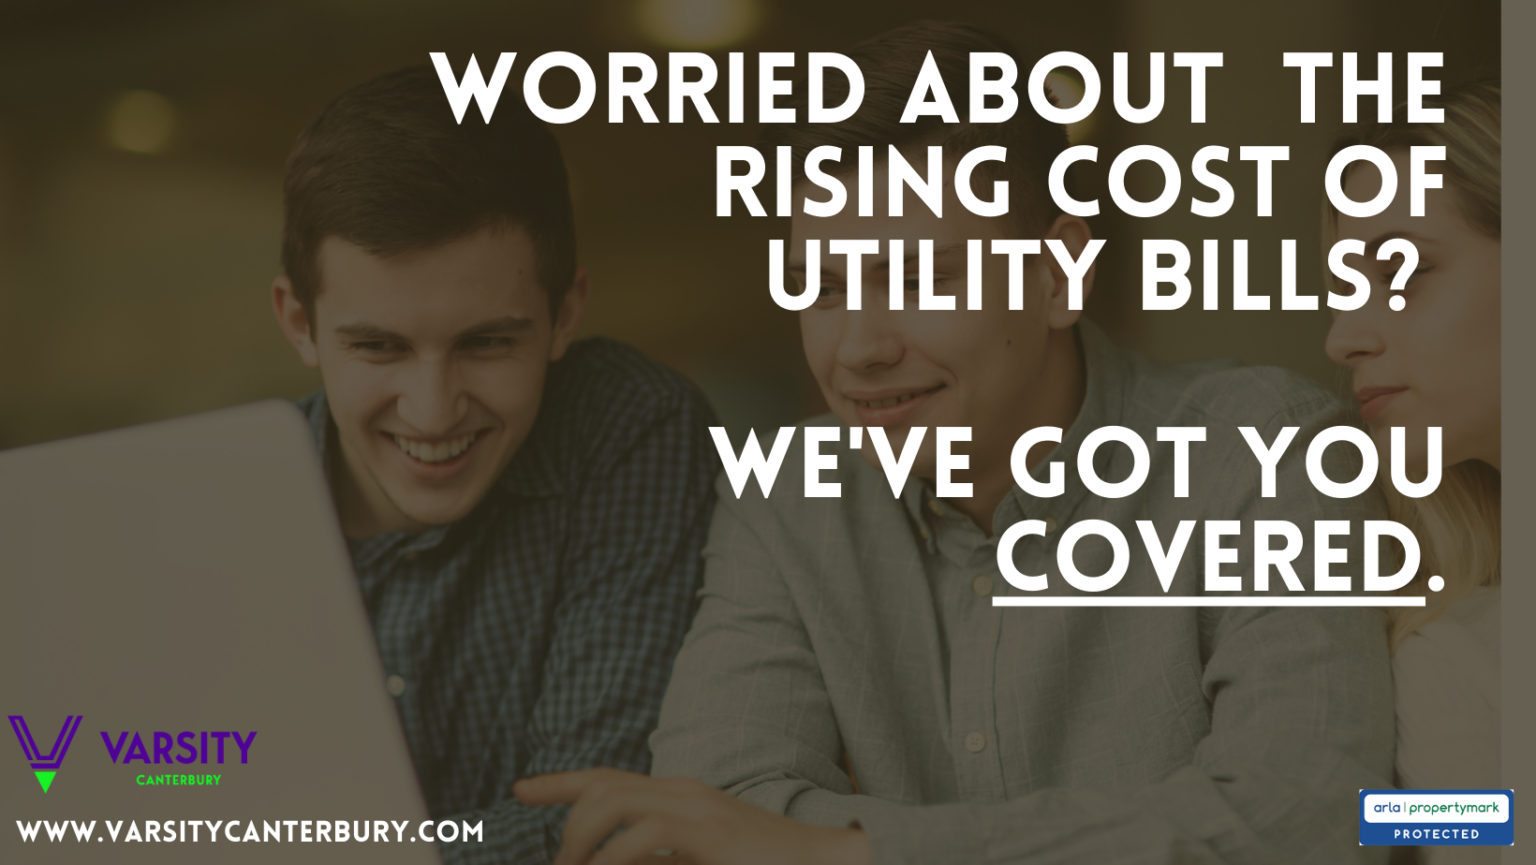 How Varisty Canterbury Can Take The Worry Out Of Your Utilities And Bill Payments